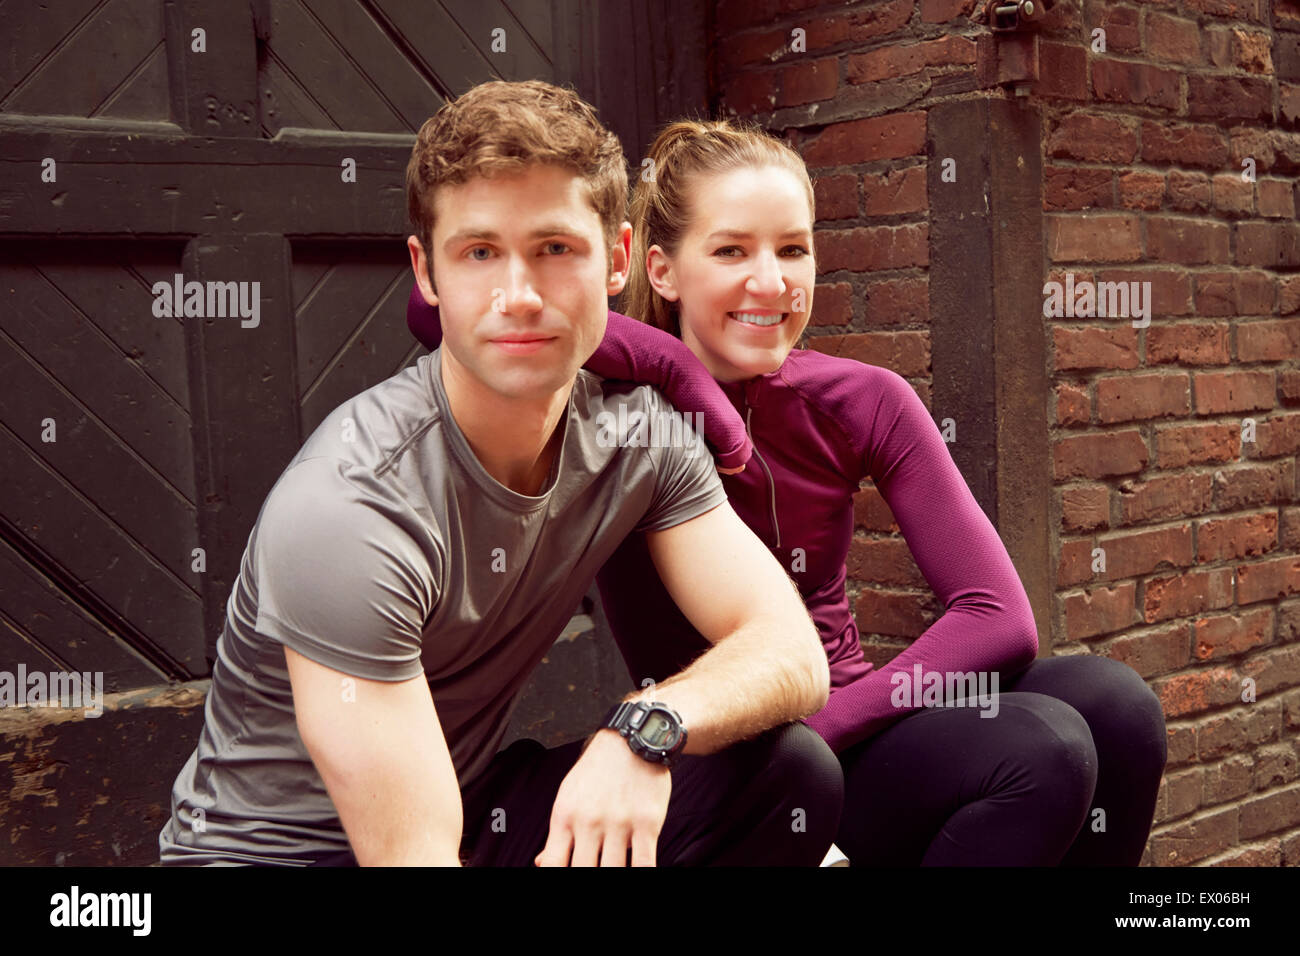 Portrait of young male and female runners sitting on alley step Stock Photo